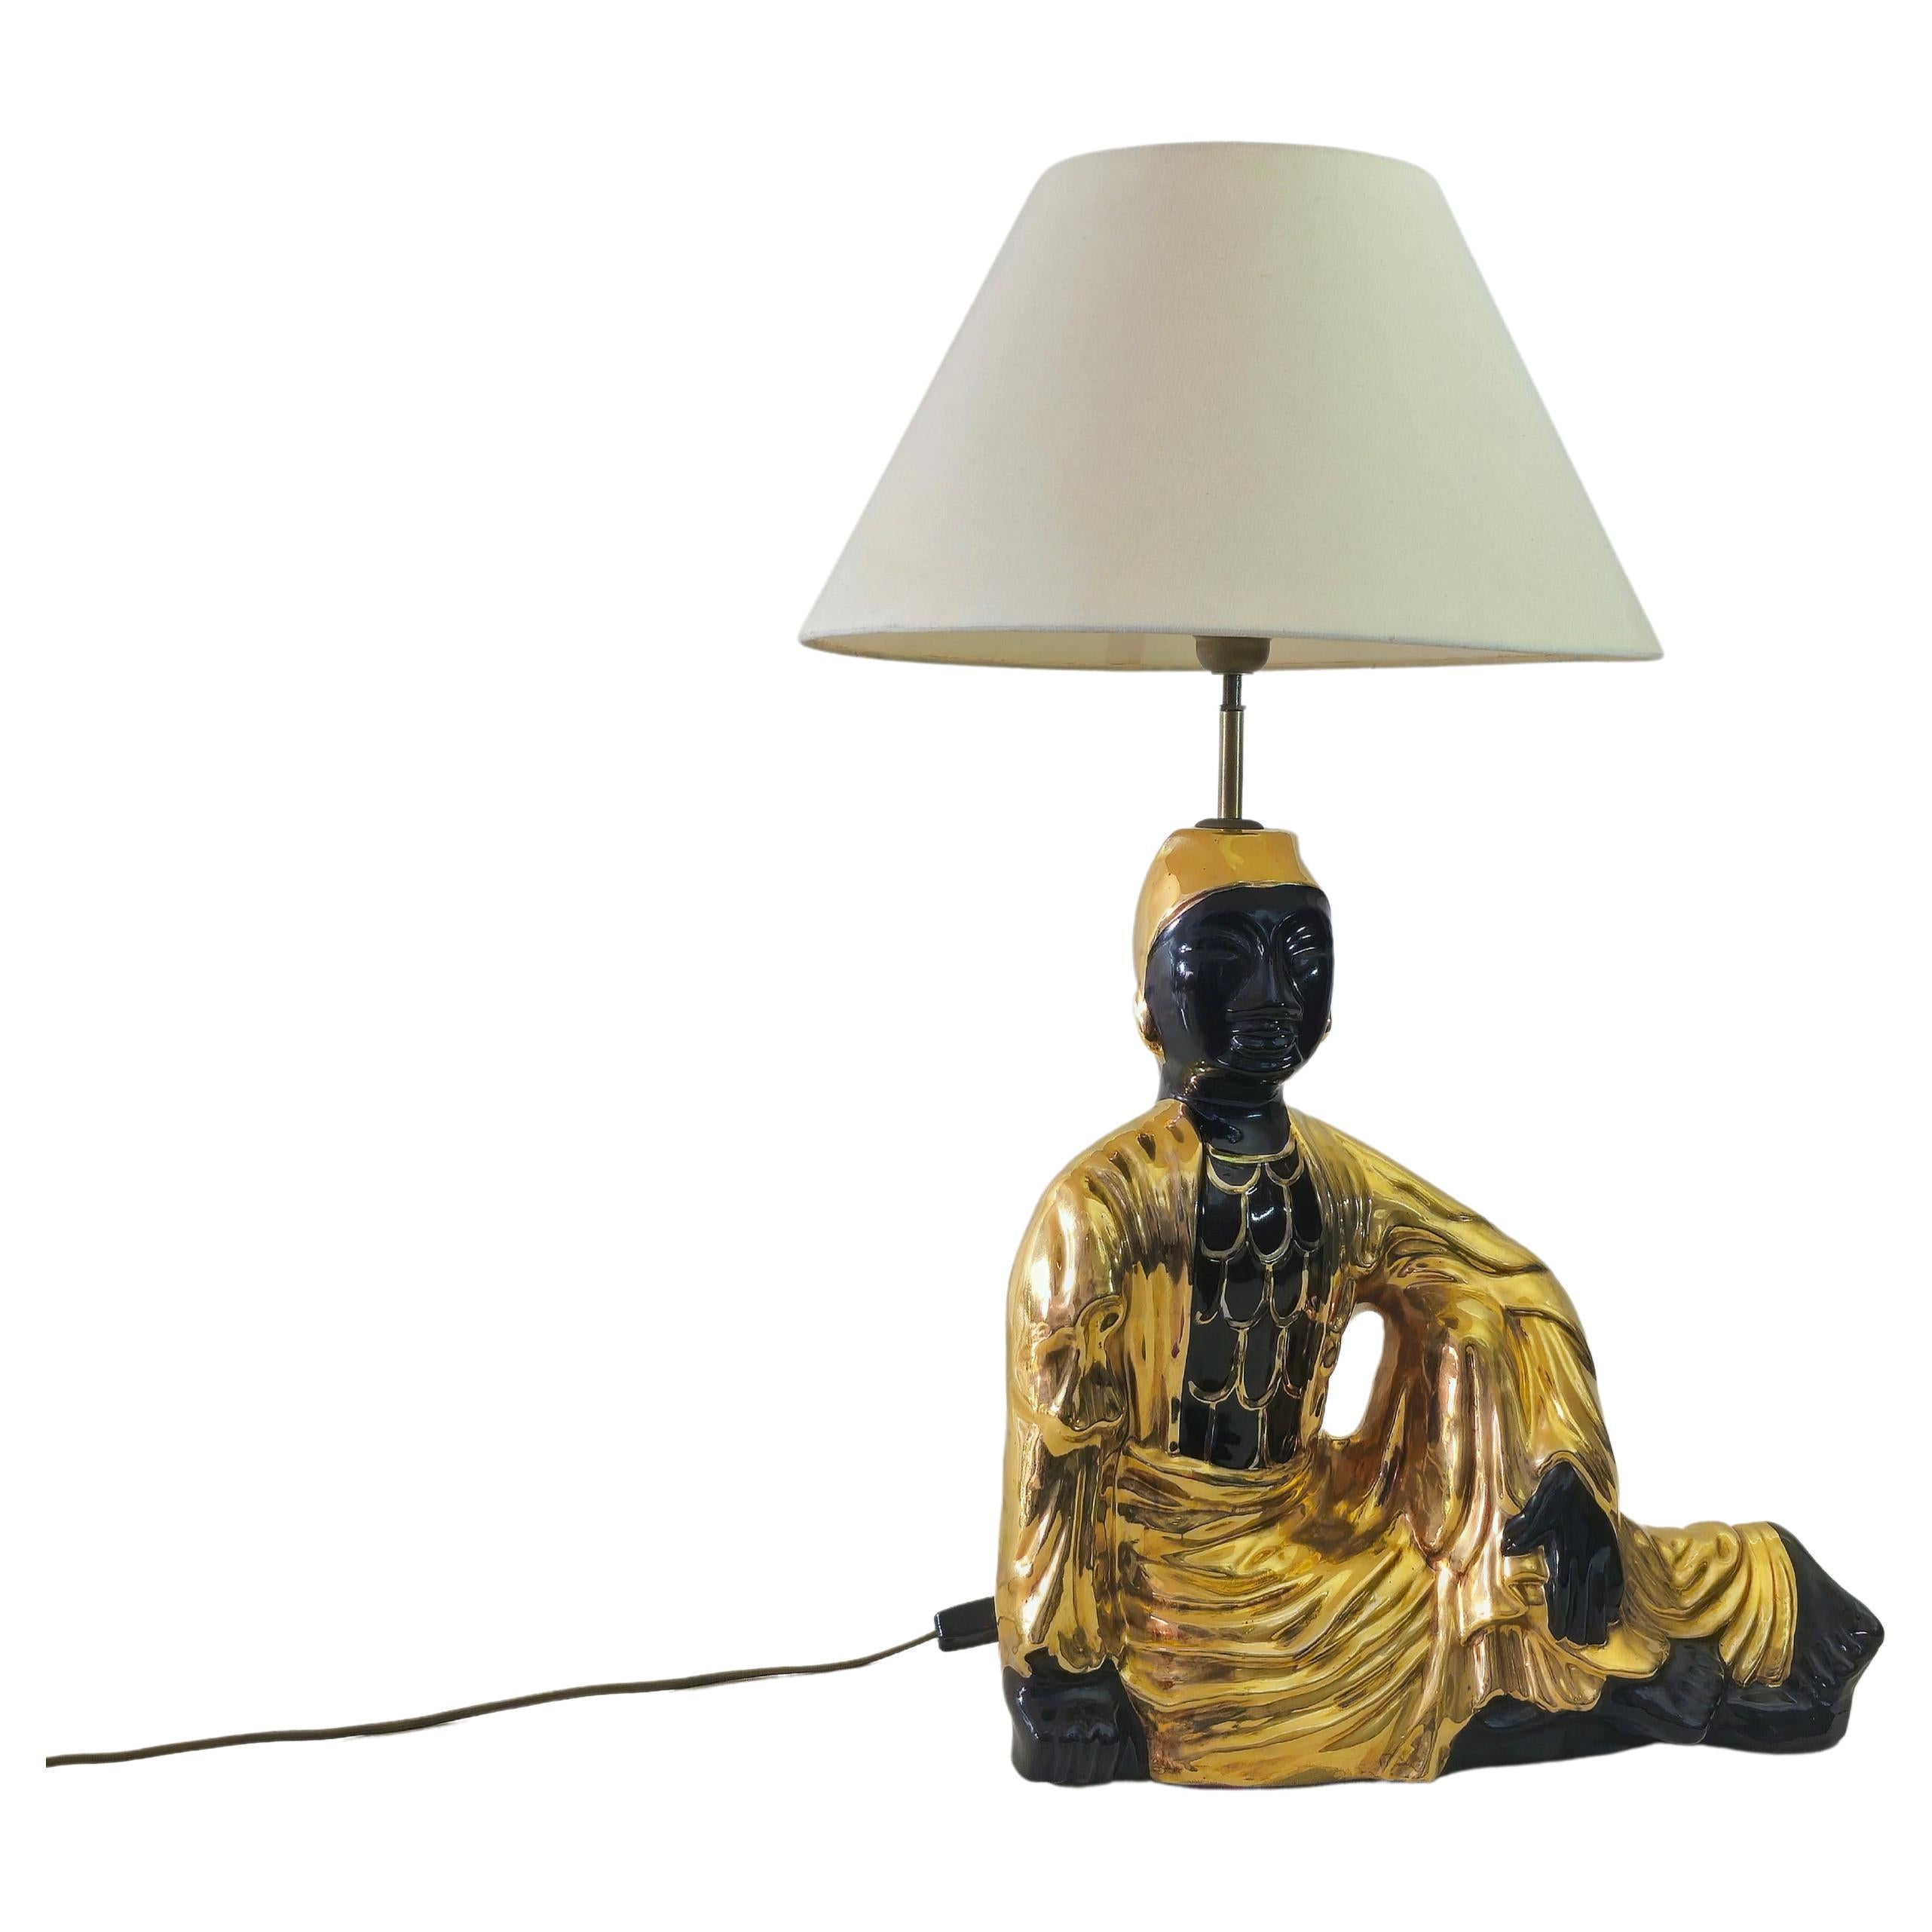 Ceramic Buddha Large Table Lamp Italy 1970s Midcentury For Sale